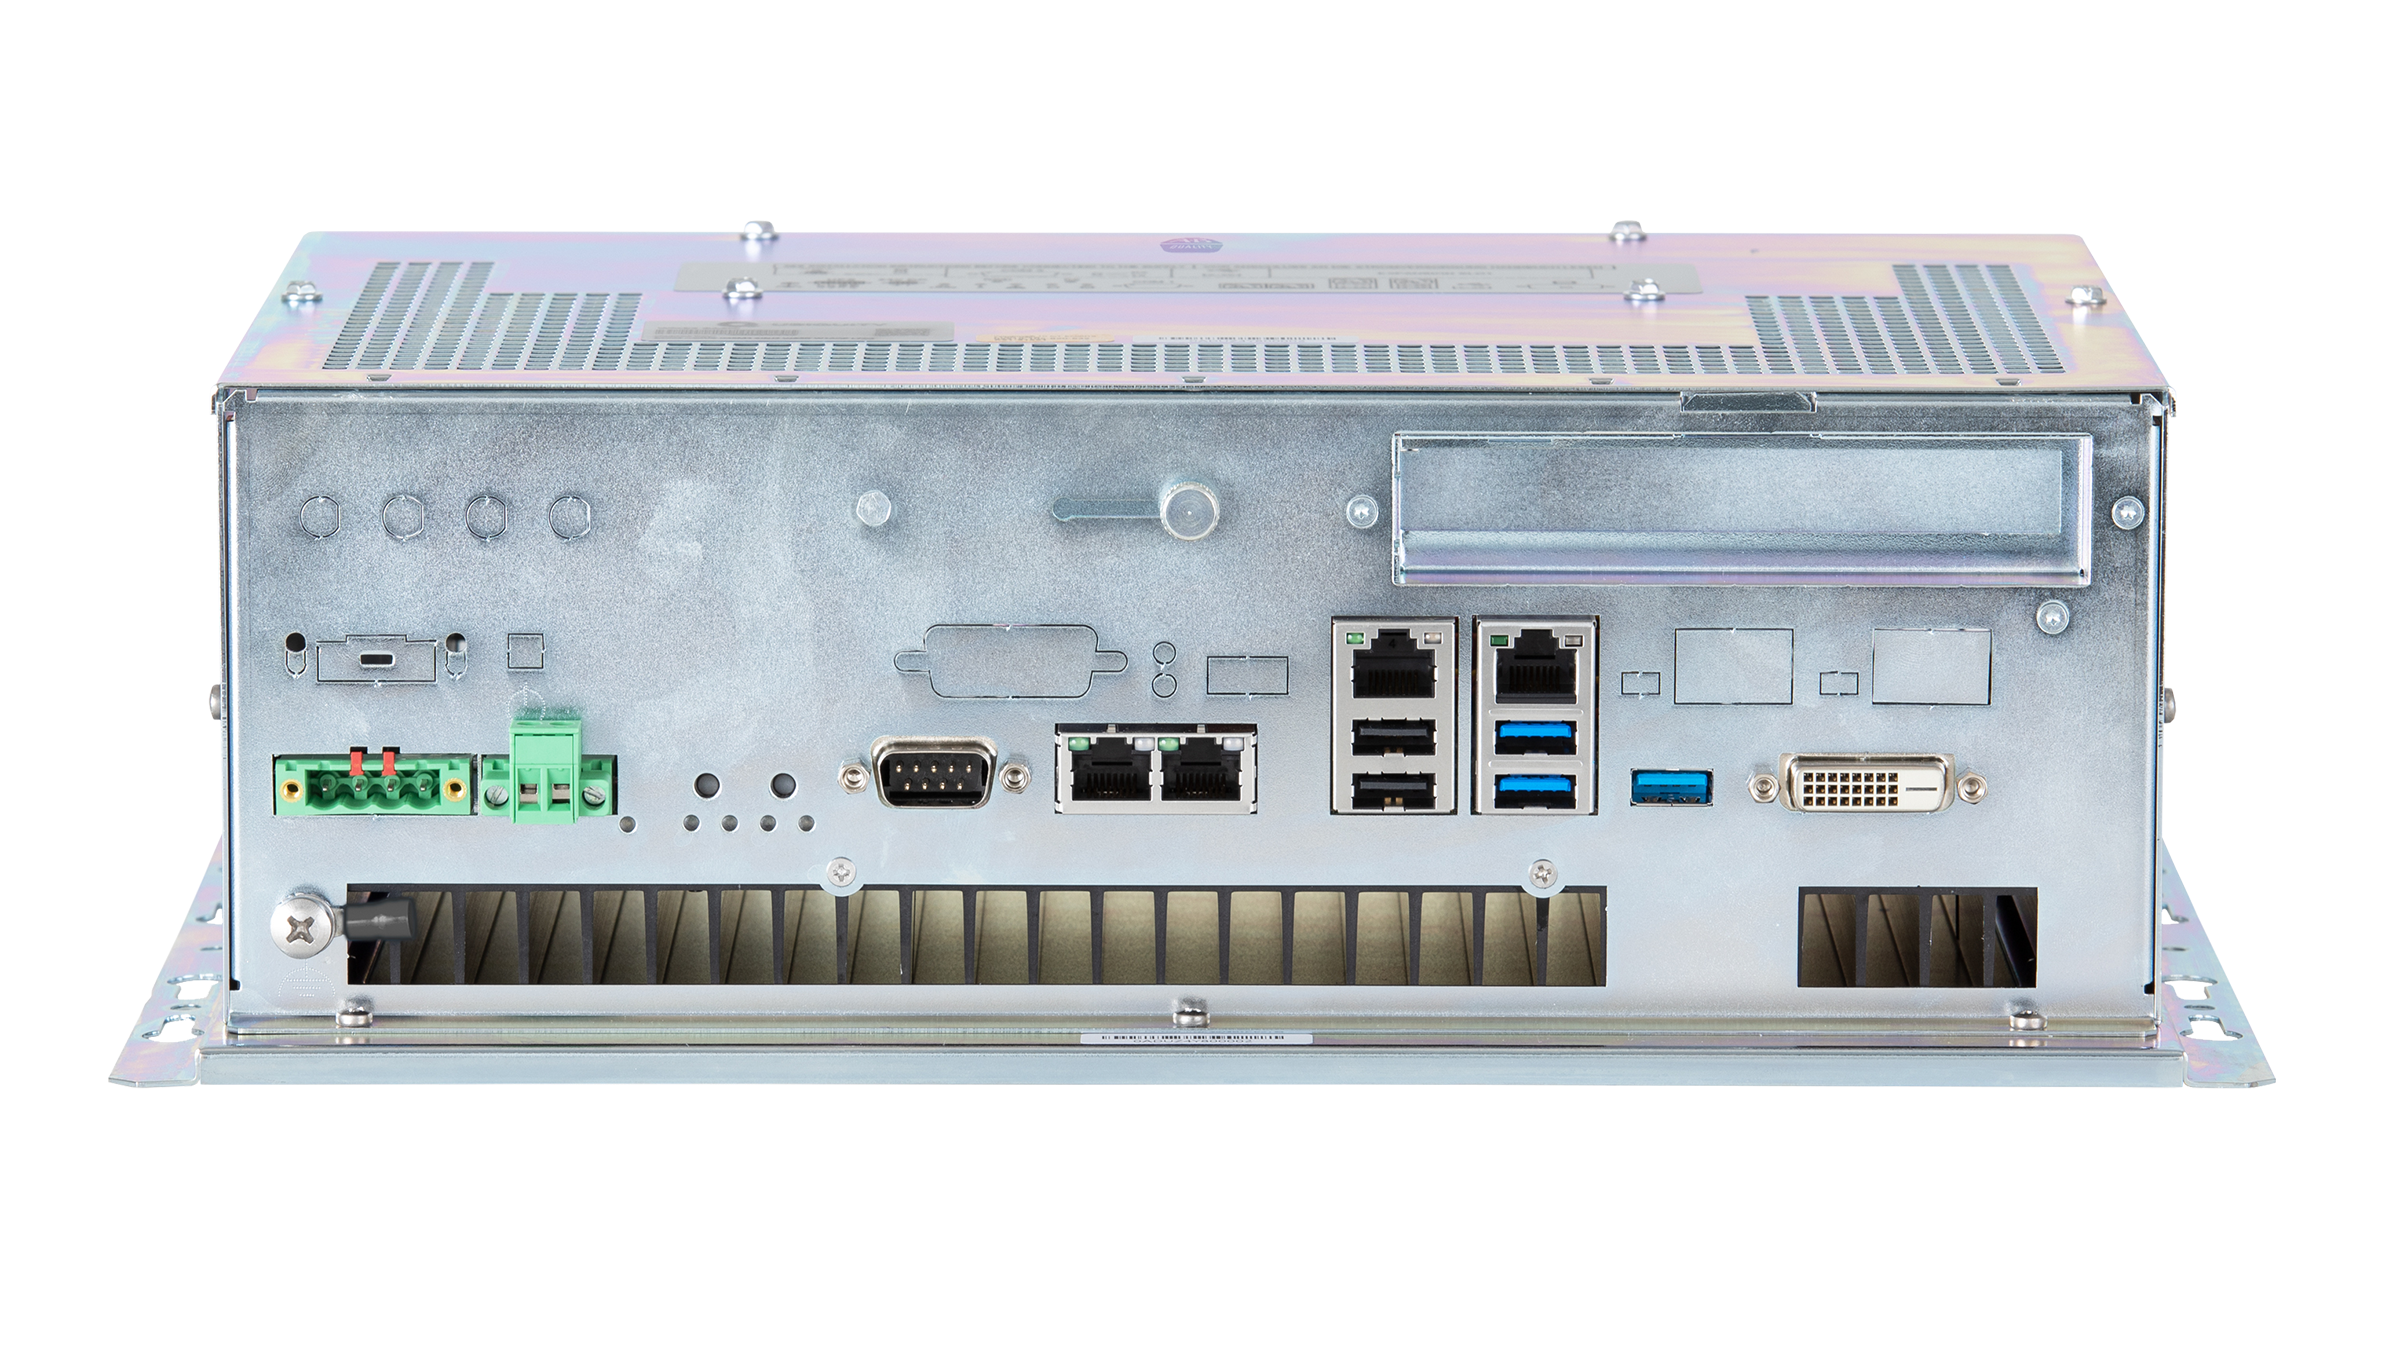 Bottom of the ASEM 6300B Intel Core i Class Wall Mount Box PC showing ports. Background is white